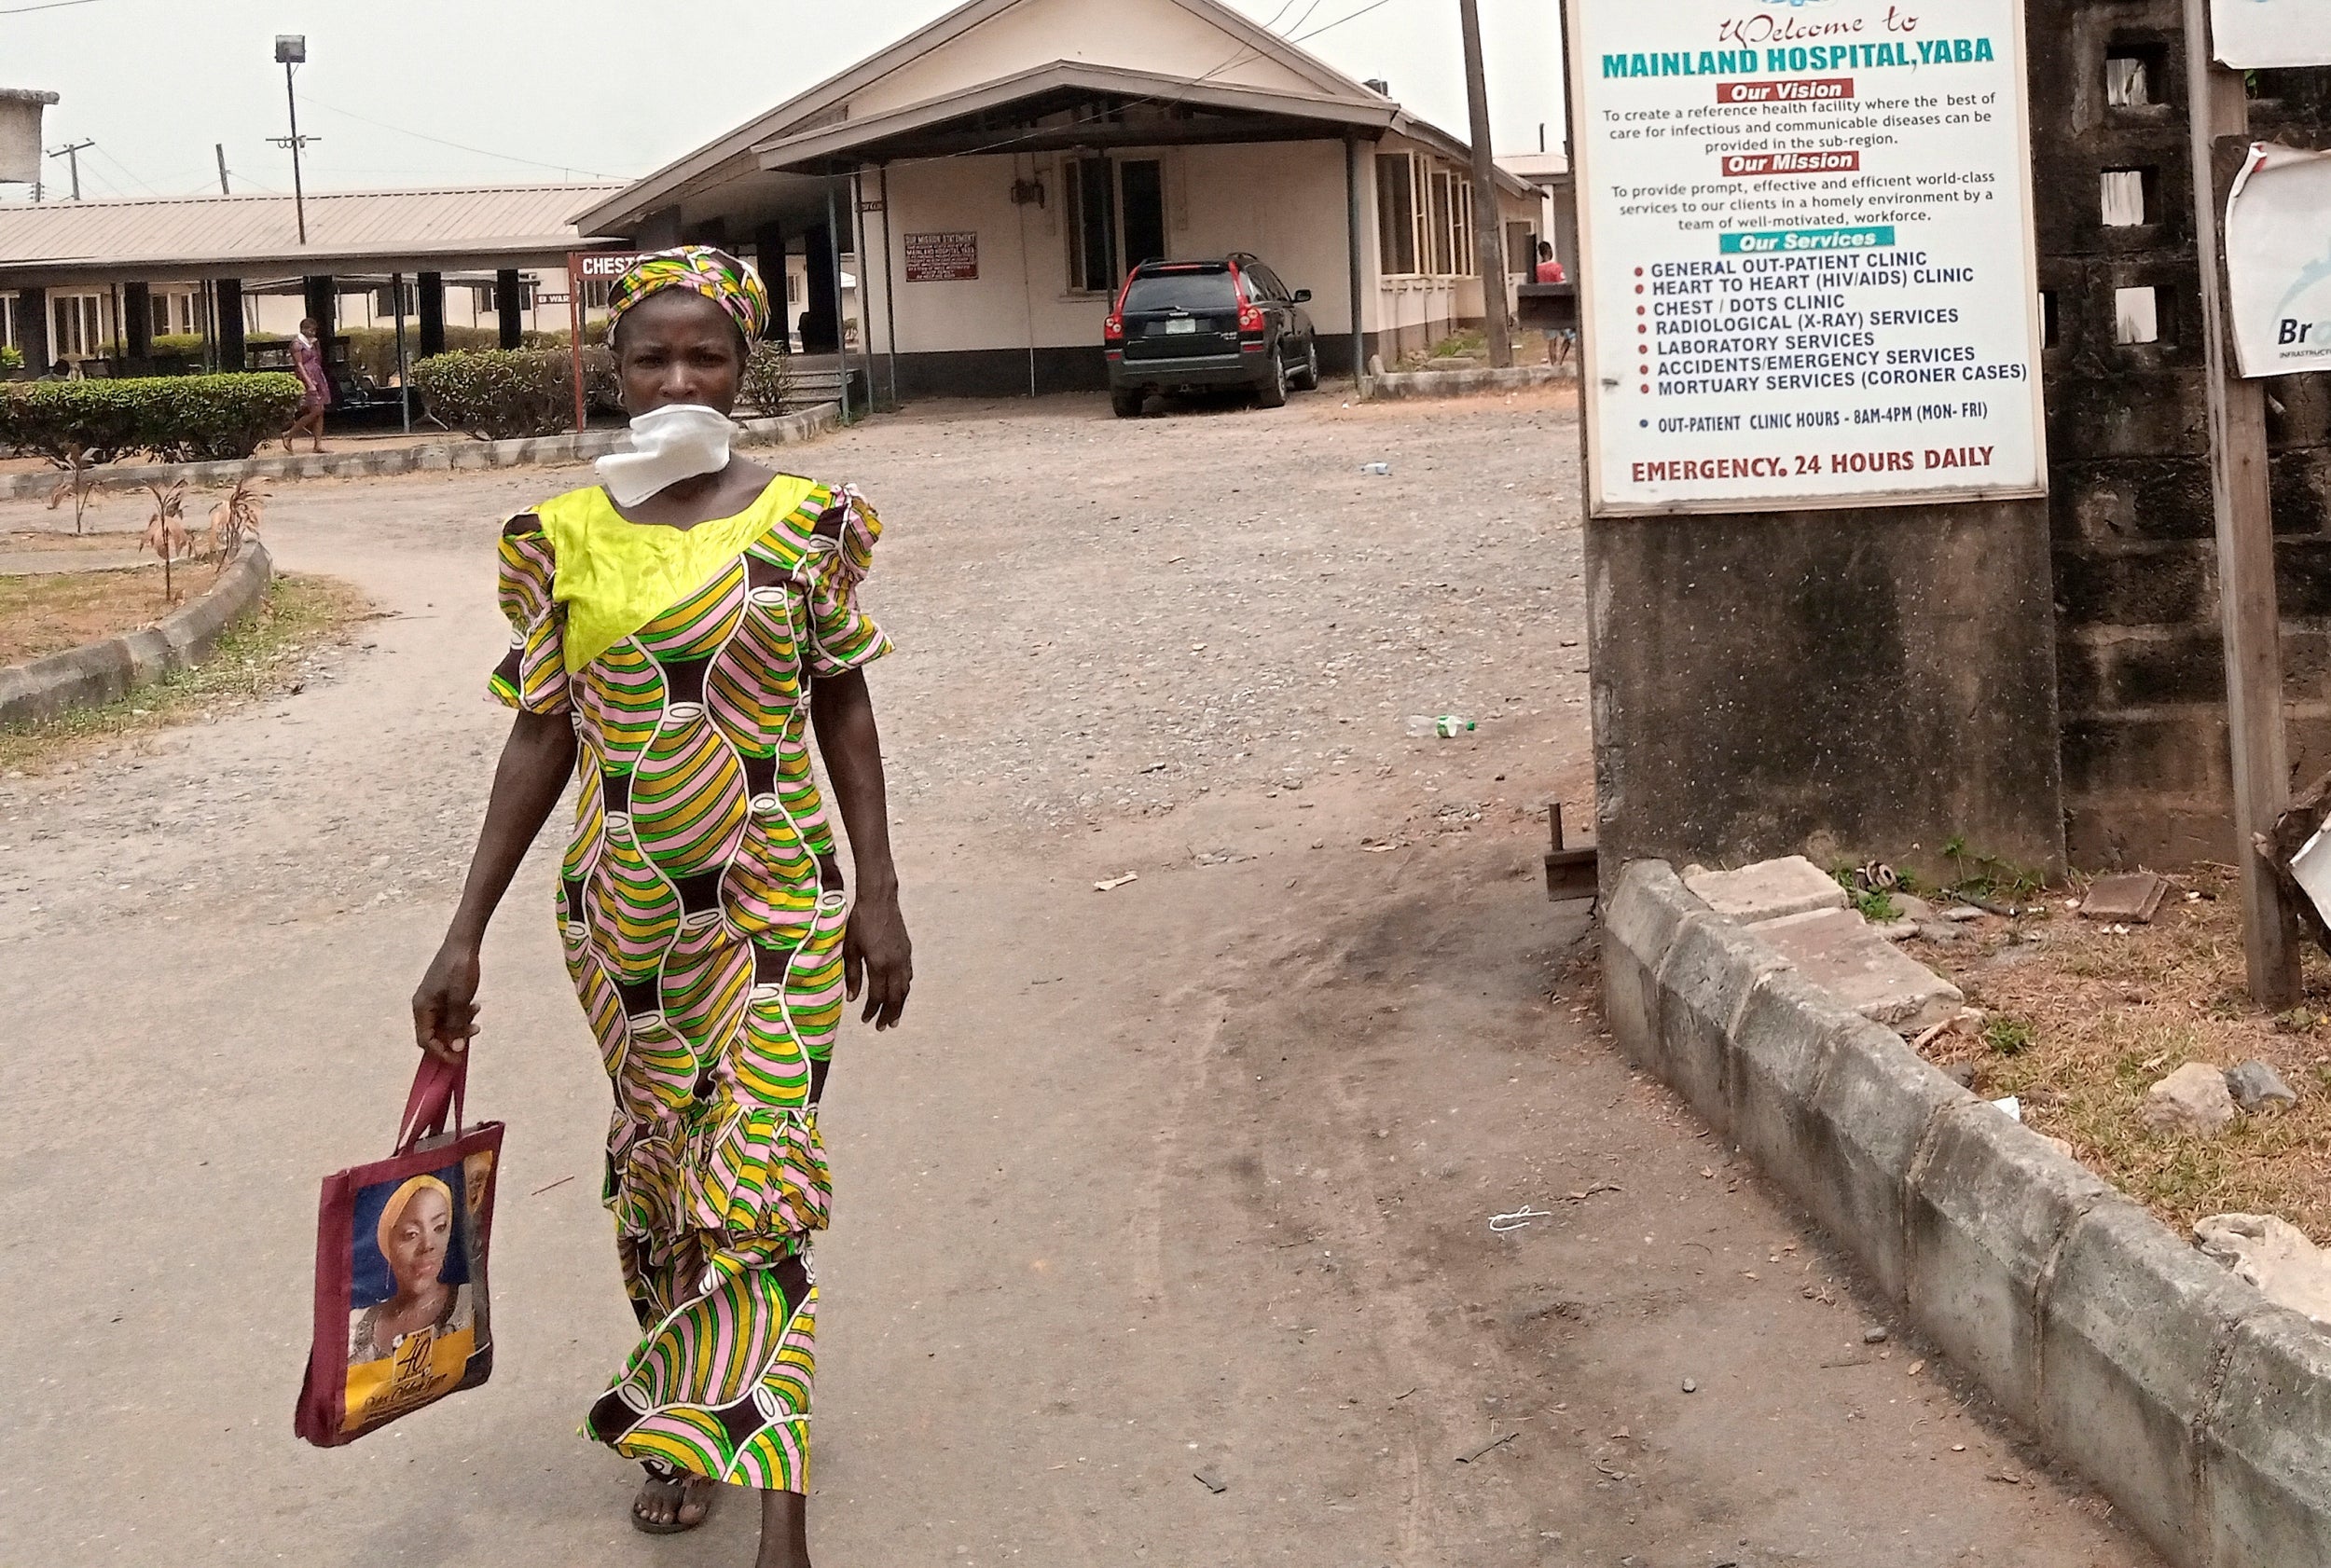 A Nigerian woman walks with a mask at the Yaba Mainland hospital where the first case of coronavirus was treated